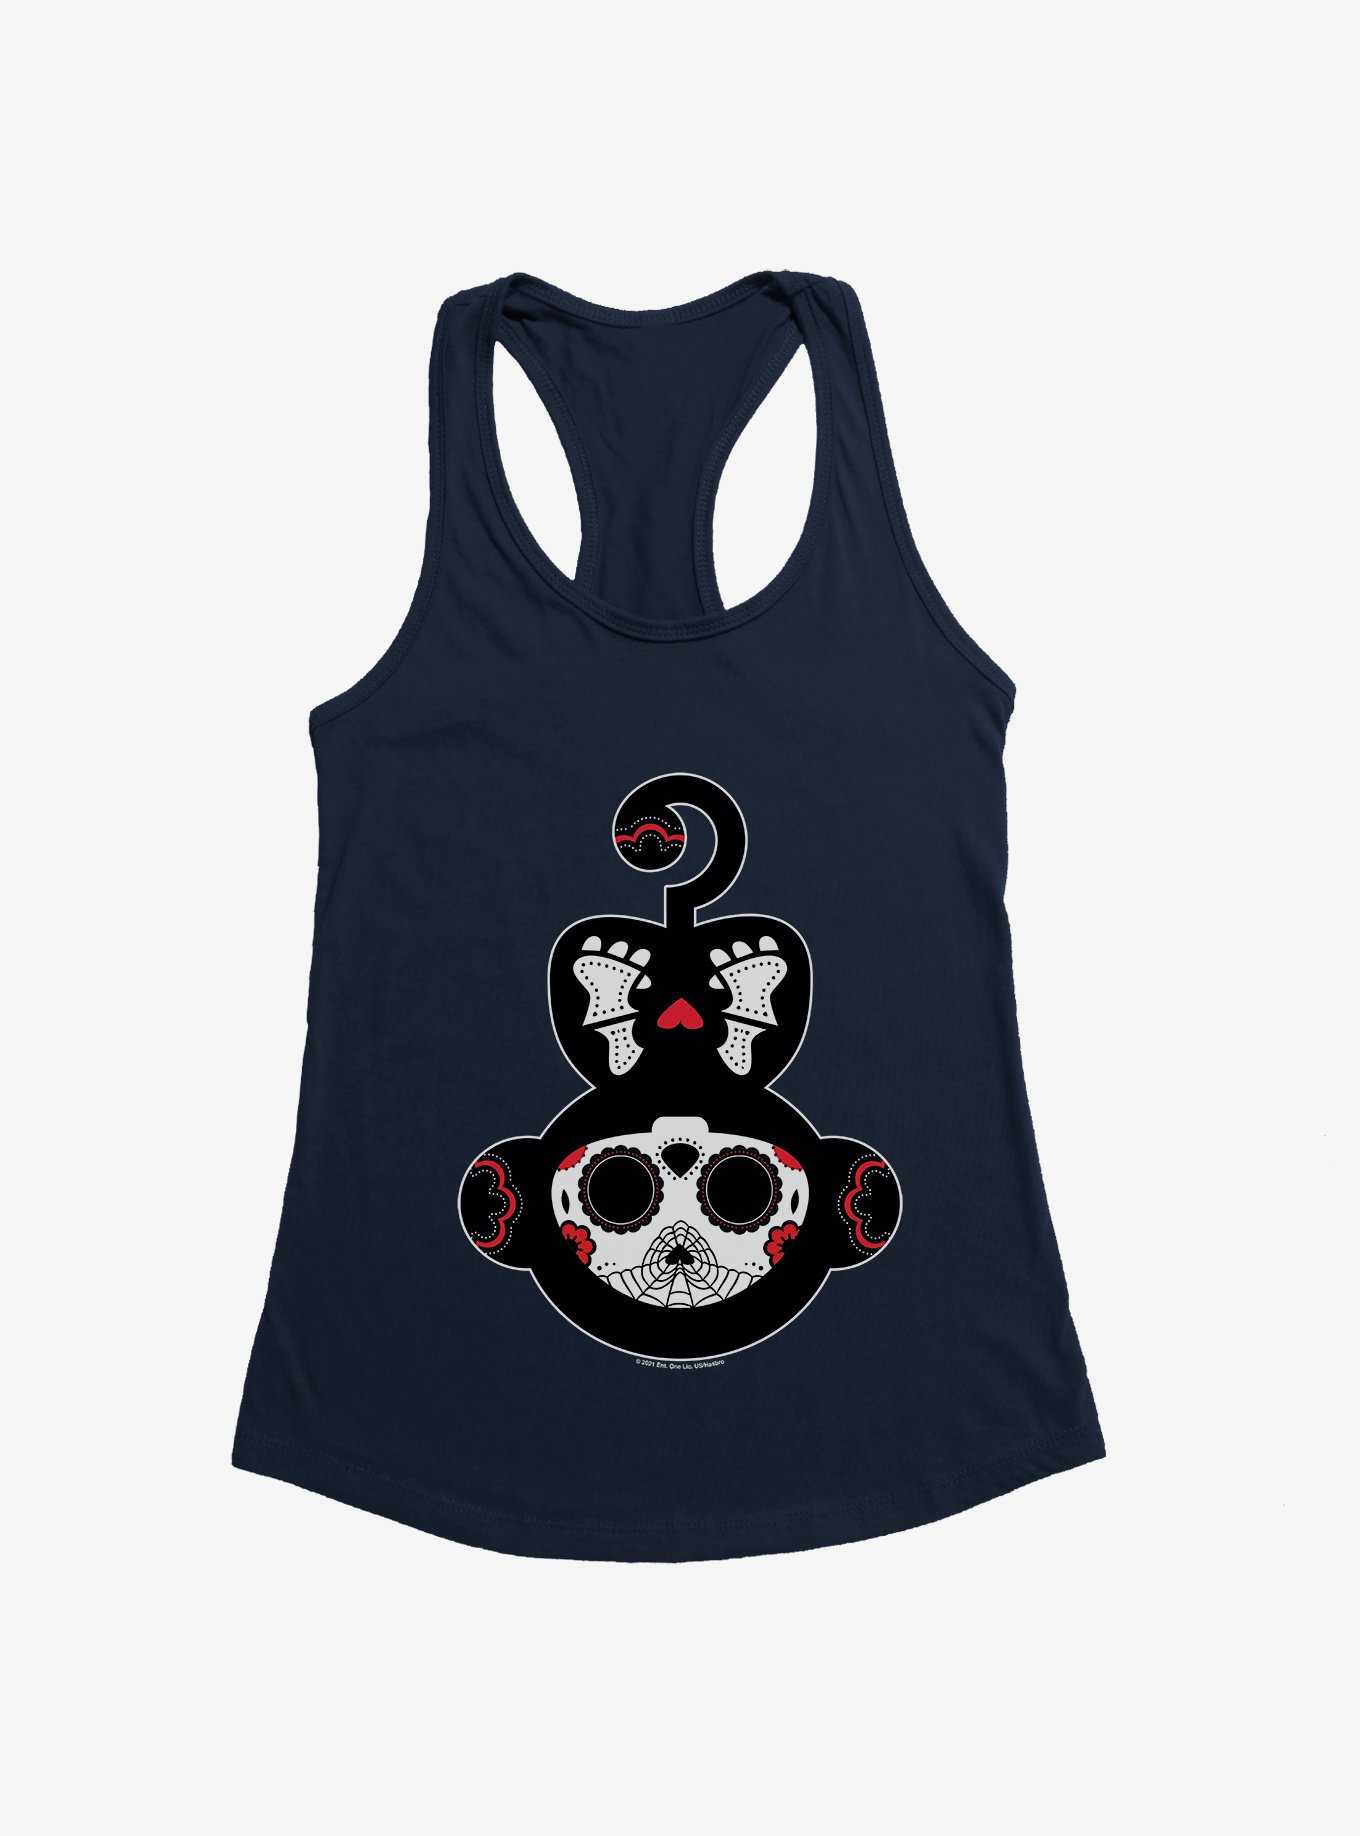 Skelanimals Day of the Dead Marcy Girls Tank, , hi-res